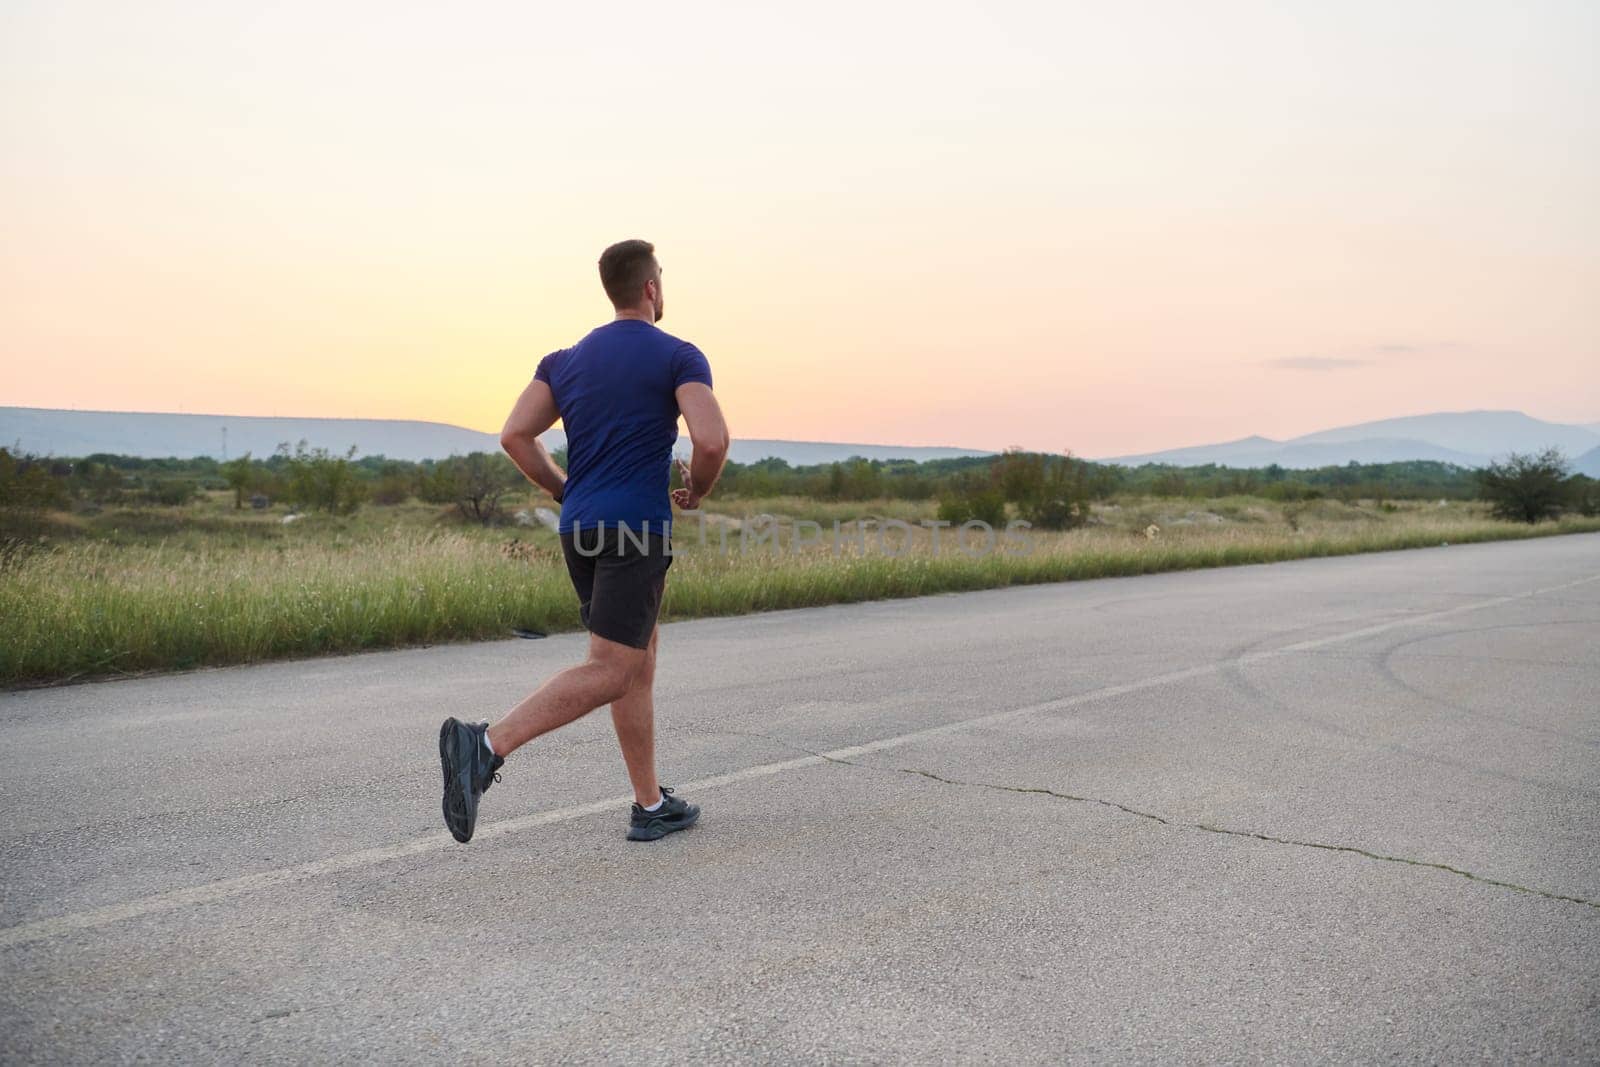 A dedicated marathon runner pushes himself to the limit in training. by dotshock